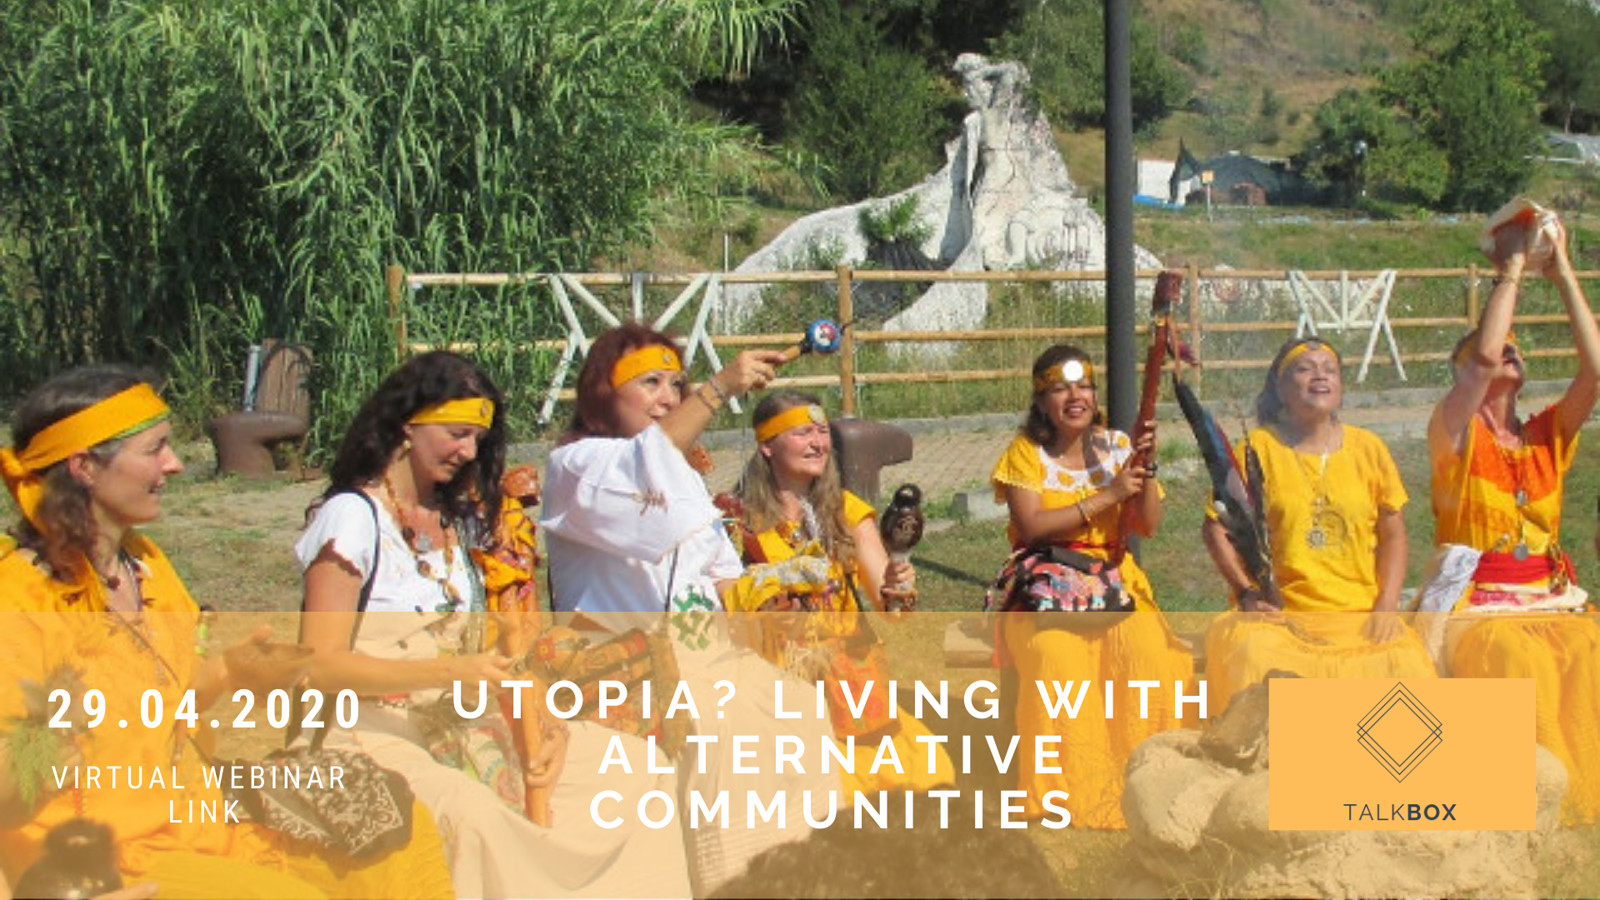 Utopia? Living with Alternative Communities at Virtual Link